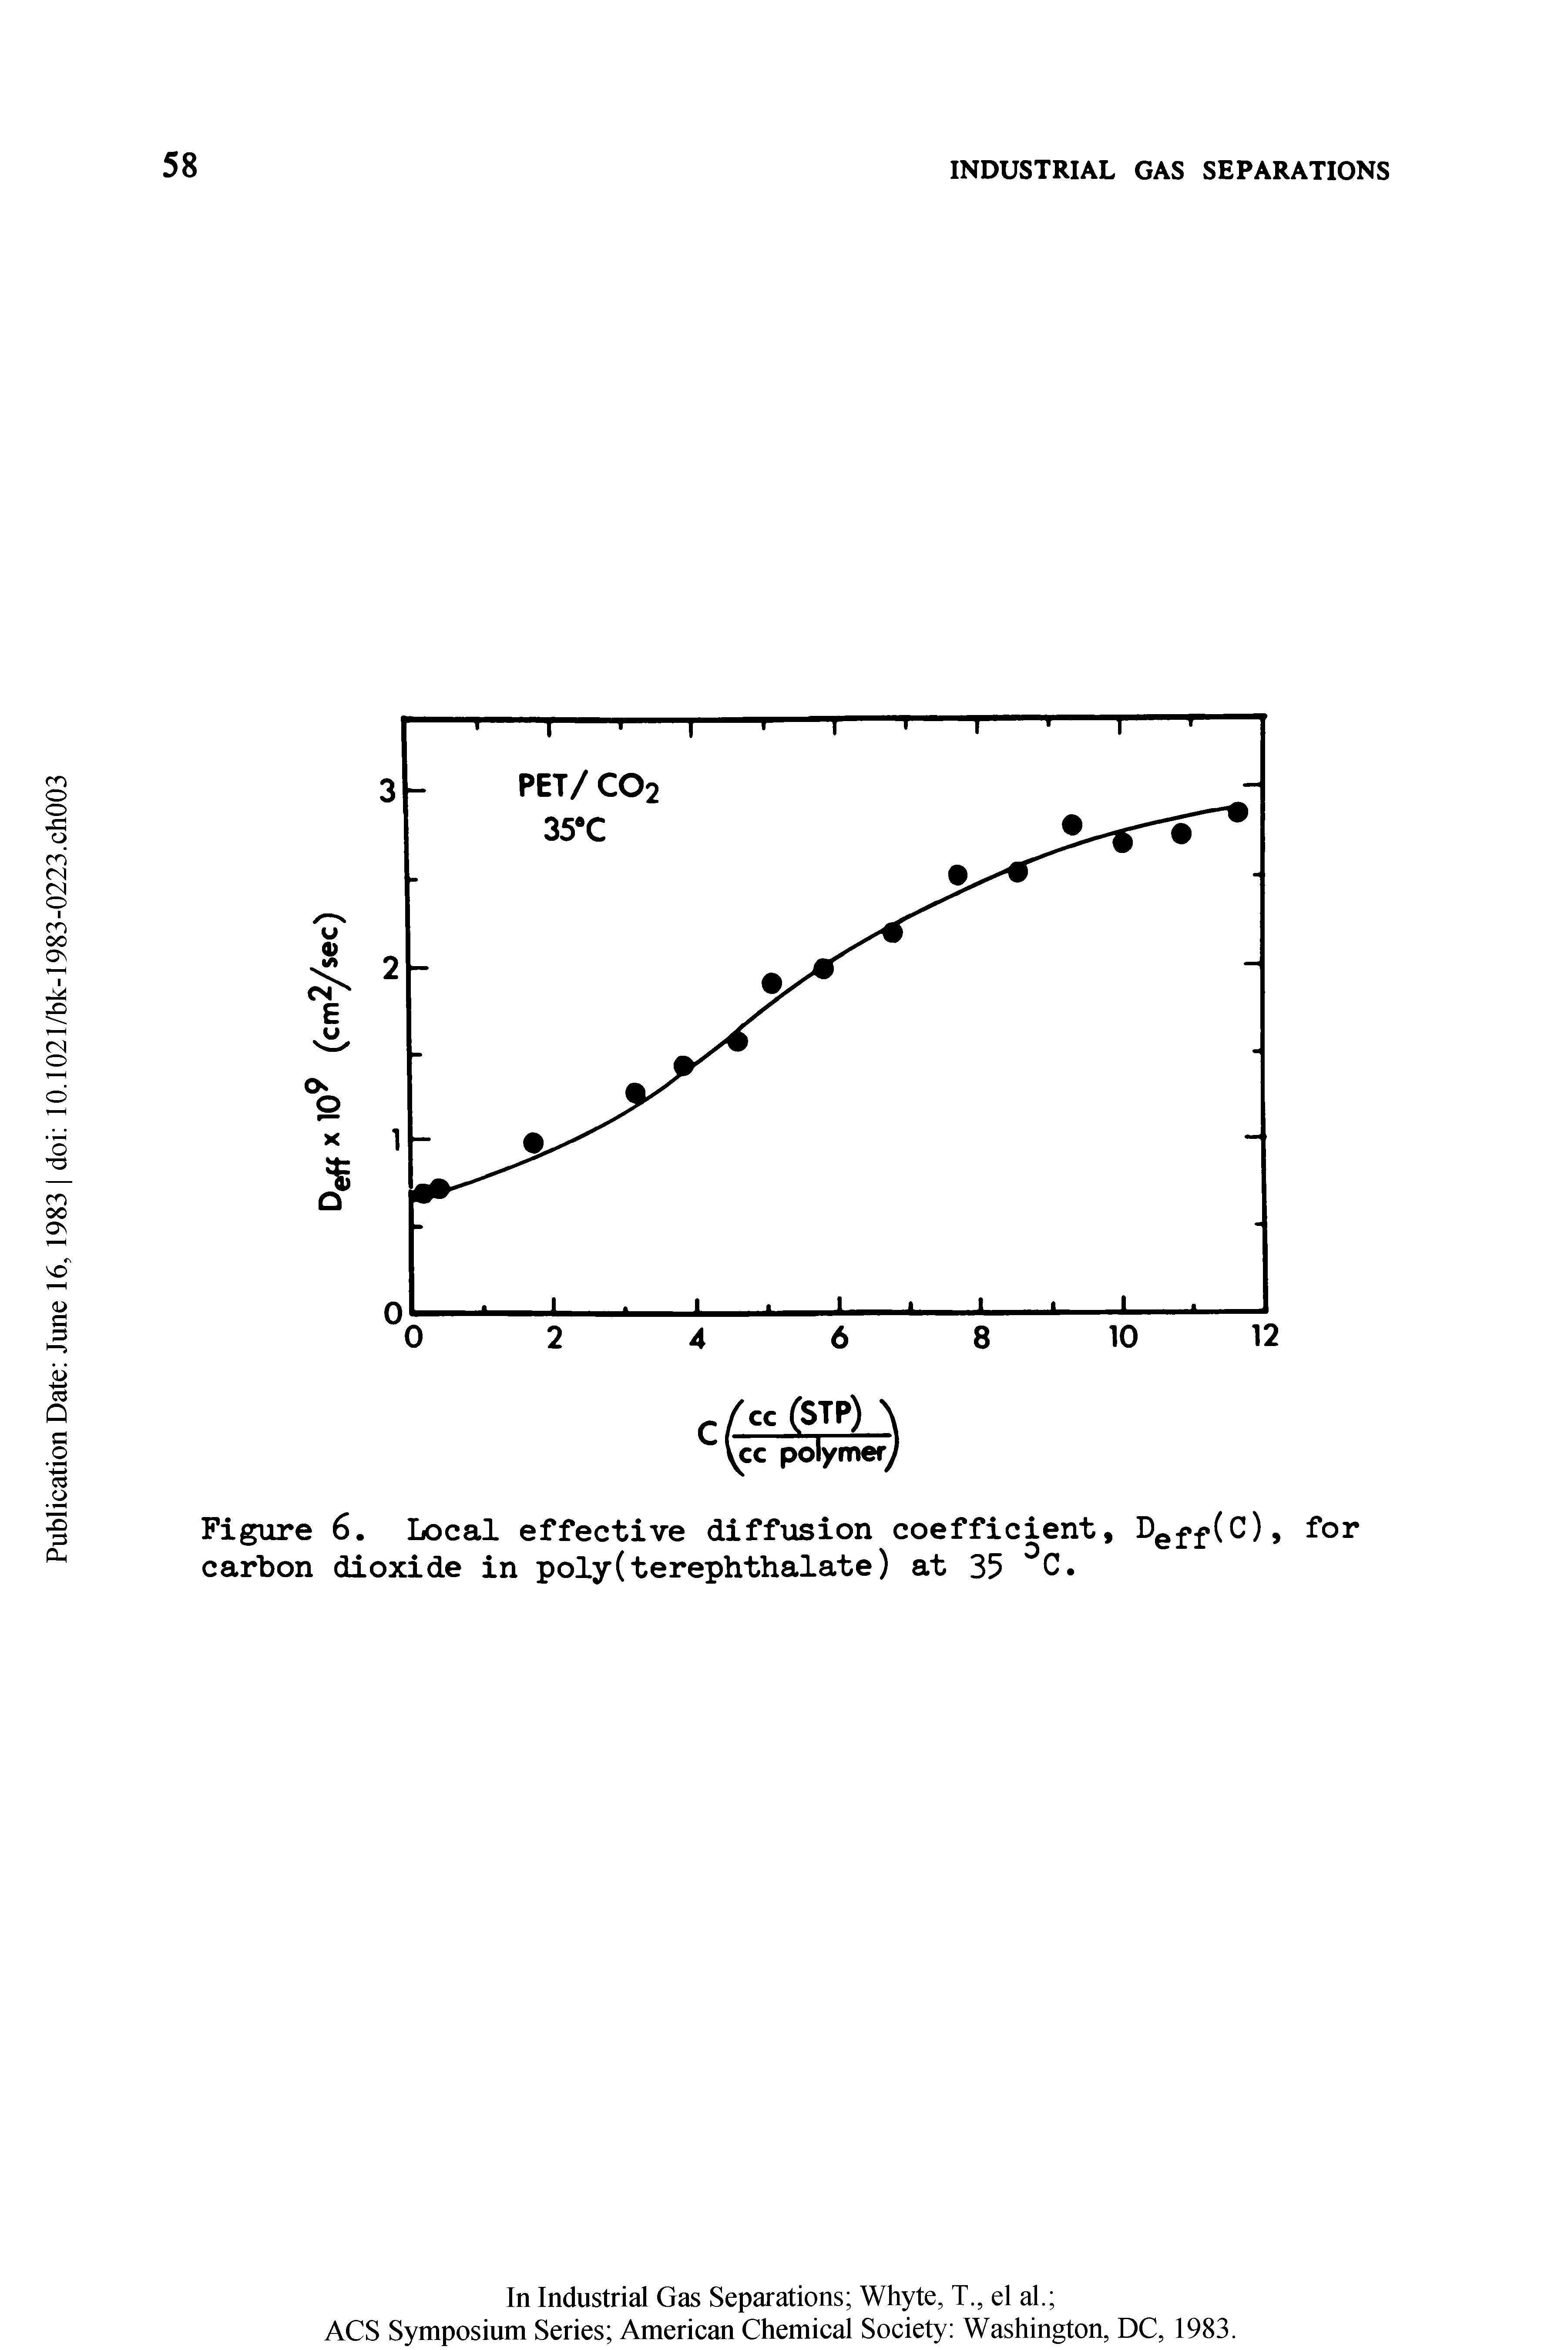 Figure 6. Local effective diffusion coefficient, Deff(C), for carbon dioxide in poly(terephthalate) at 35 °C.